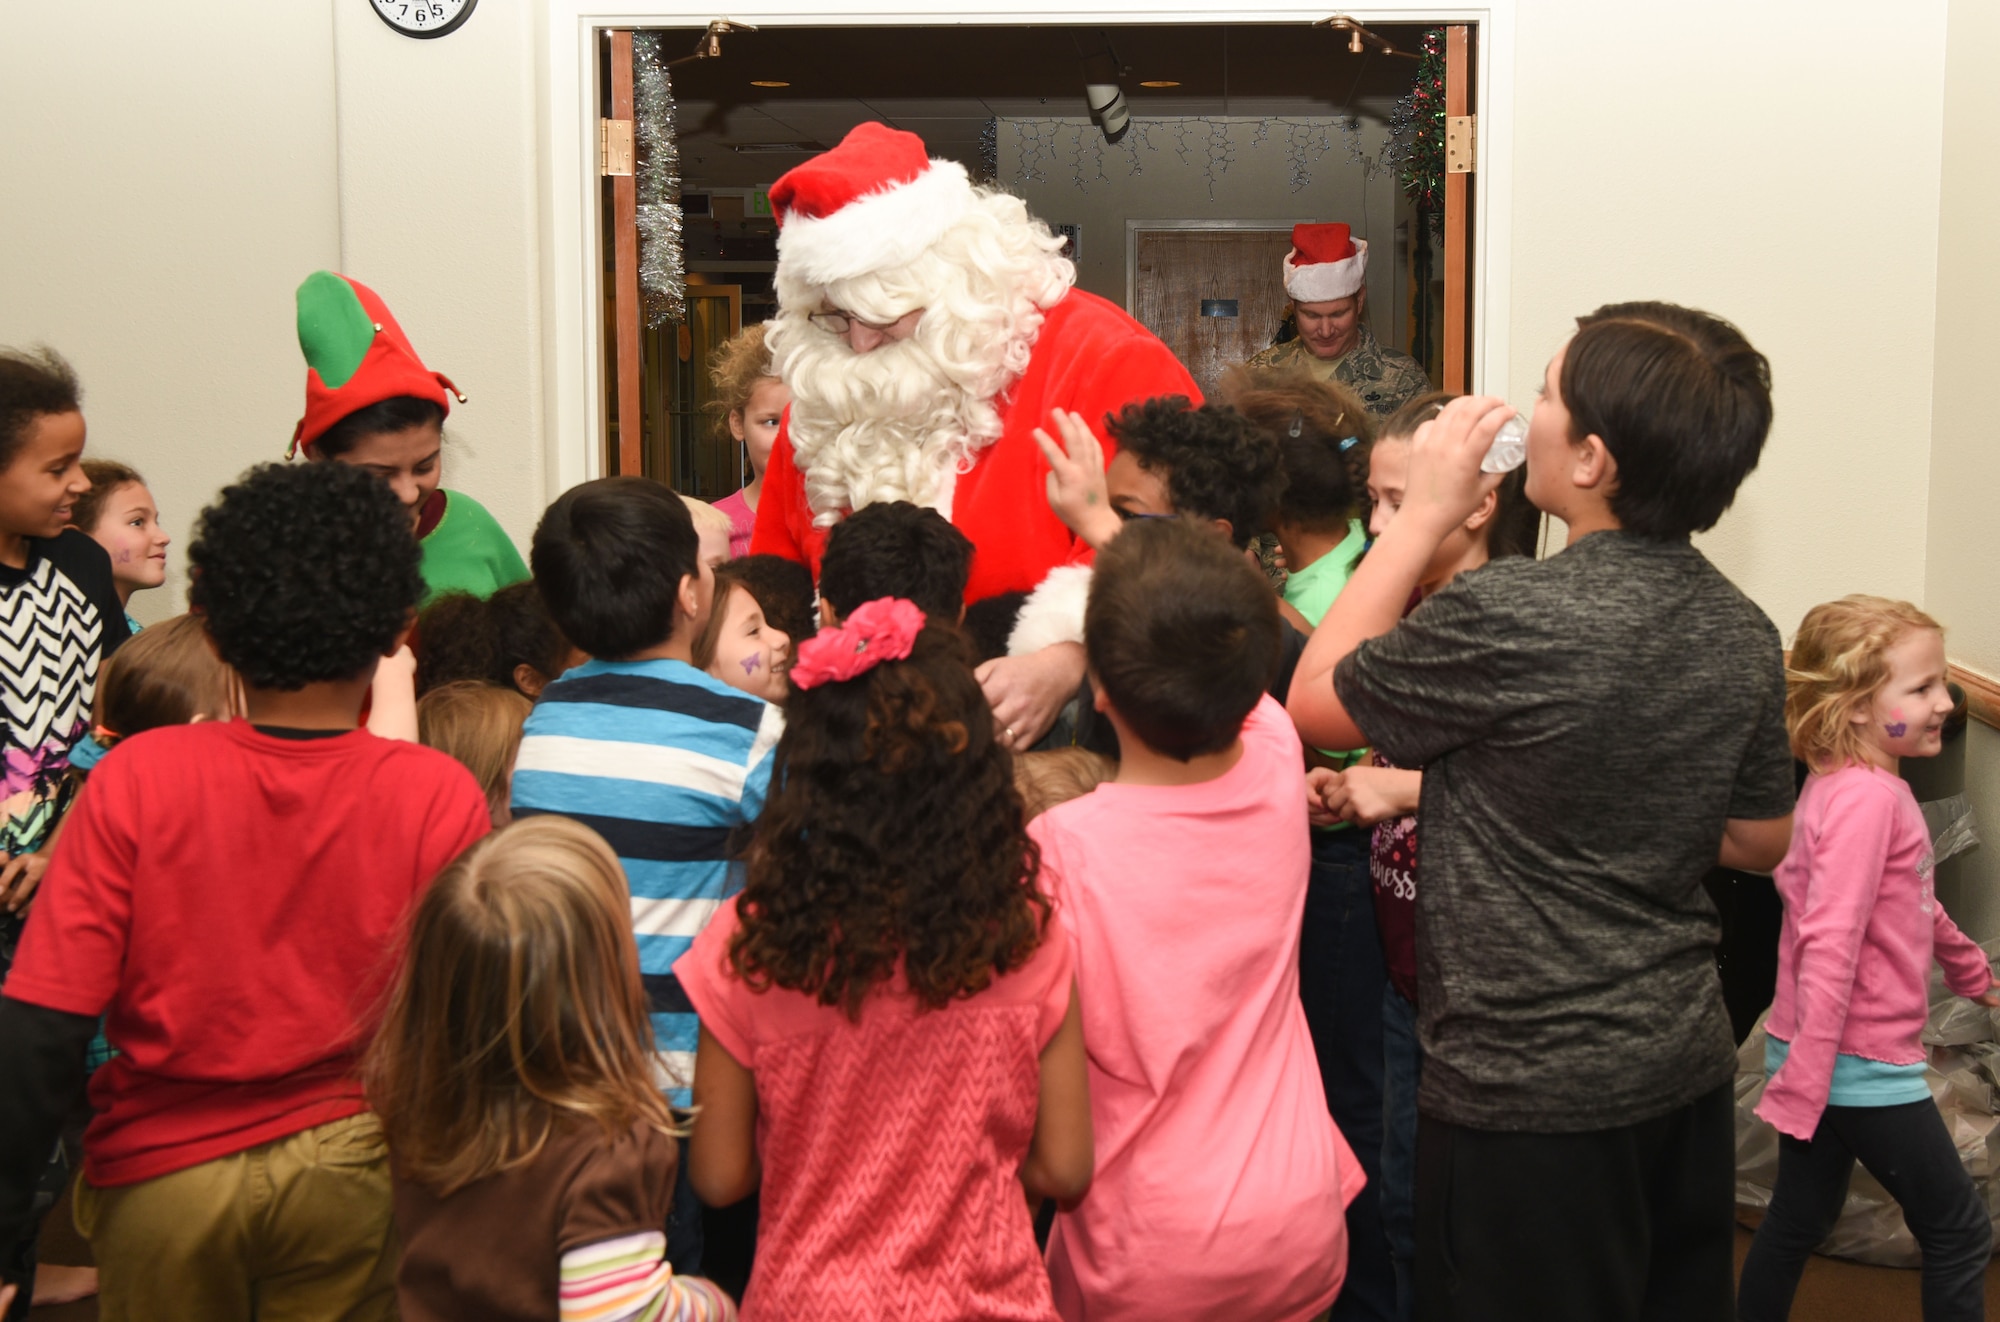 Children run to greet and hug Santa during Operation Provide Joy at F.E. Warren Air Force Base, on Dec. 9, 2017. Santa snuck into the building with his elf while the children were making crafts and playing in the bounce house. The event was established to booster community partnership and help local families in need get their children into the holiday spirit. (U.S. Air Force photo by Airman 1st Class Abbigayle Wagner)